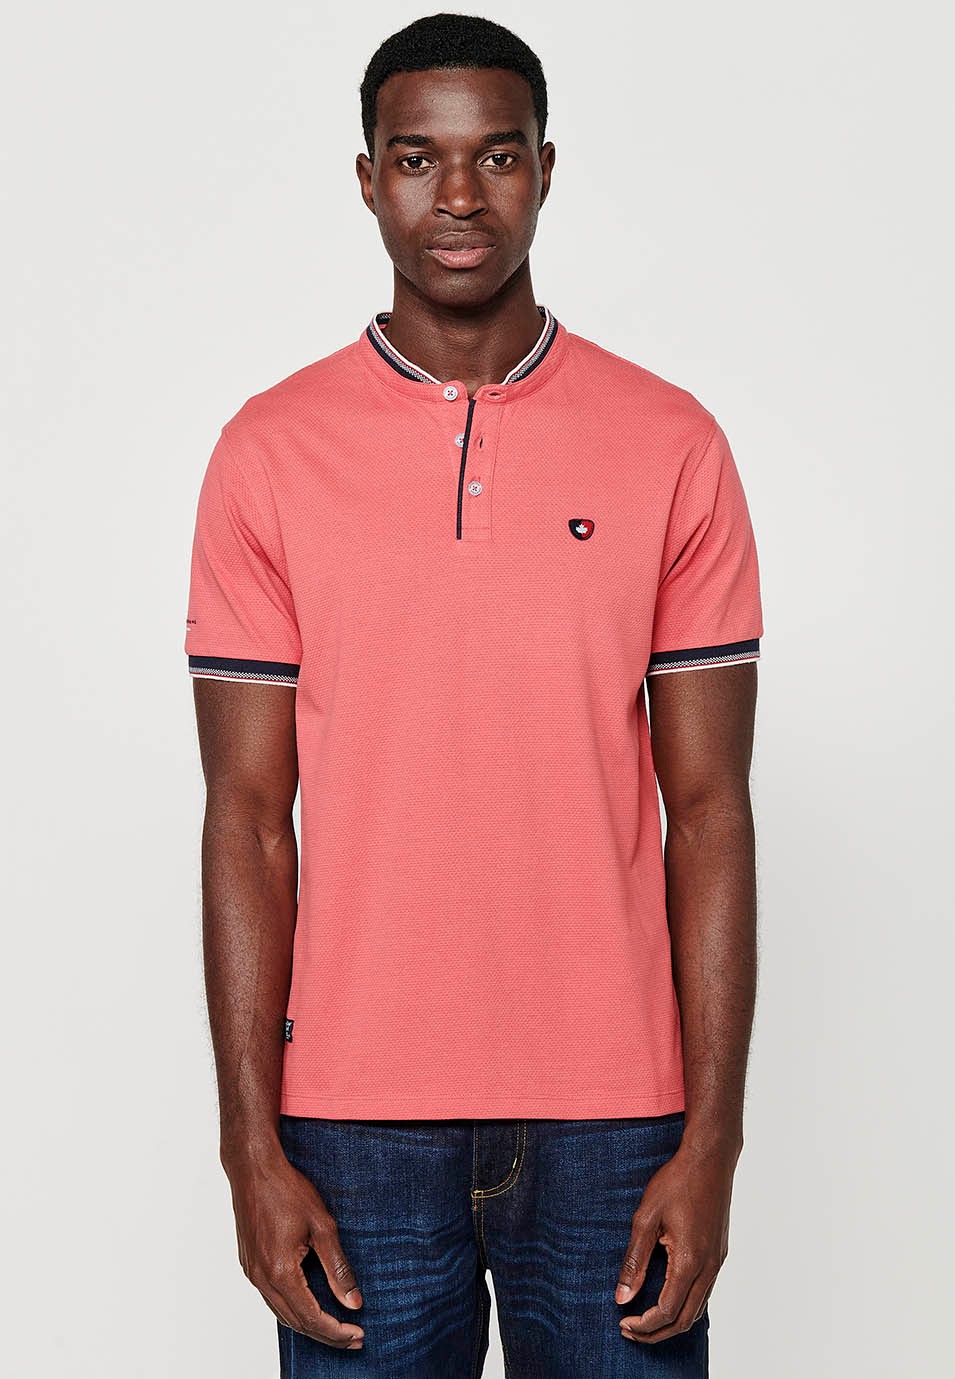 Short-sleeved cotton polo shirt with ribbed finish with round neck with buttoned opening and textured with side slits in Pink for Men 3